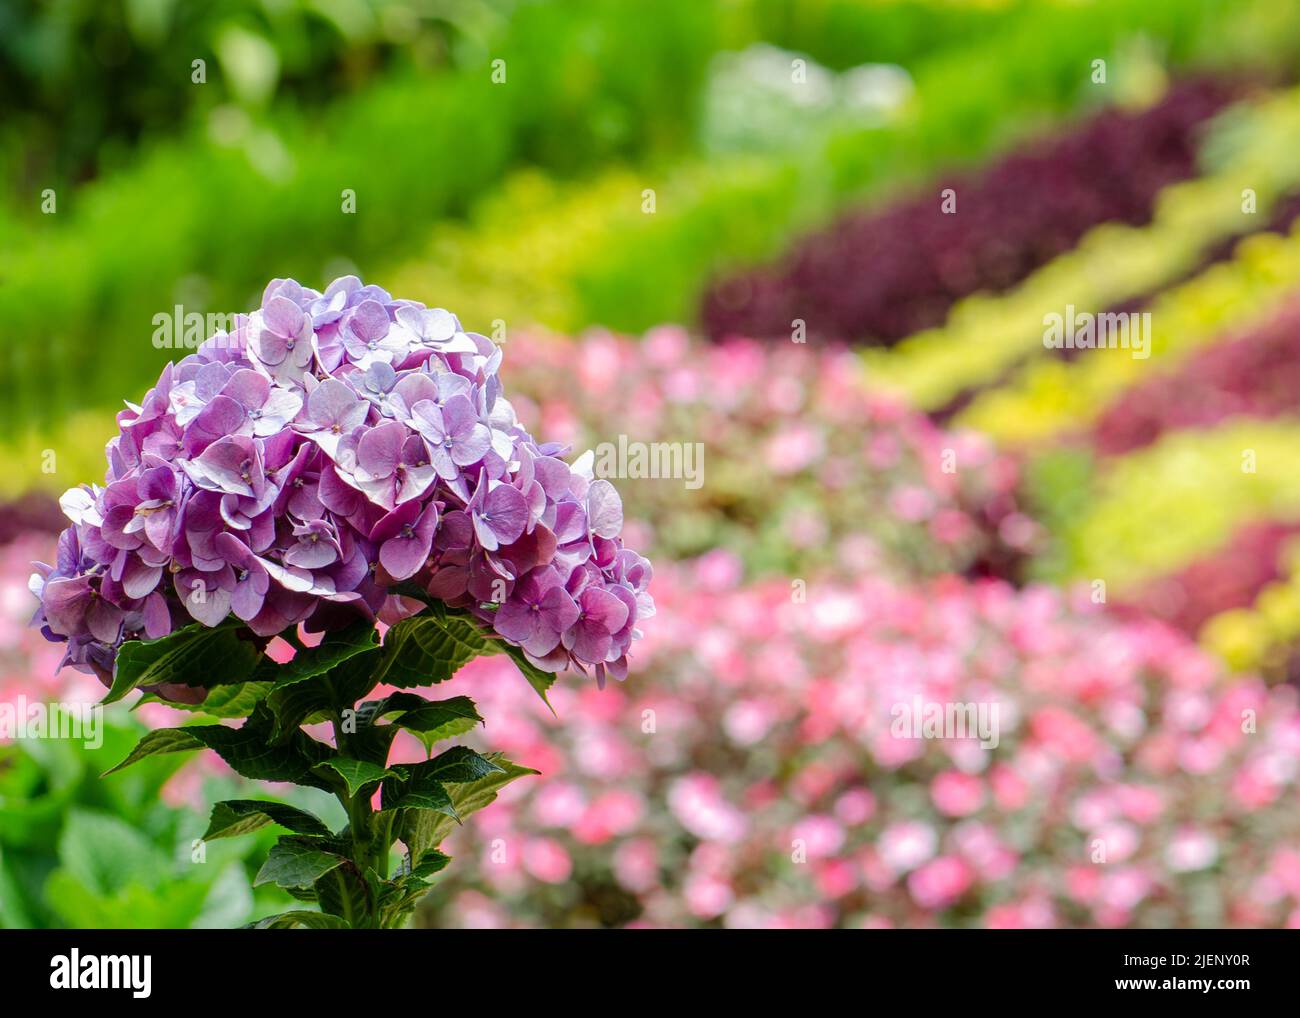 head of a hydrangea flower against background of flowers in the garden Stock Photo